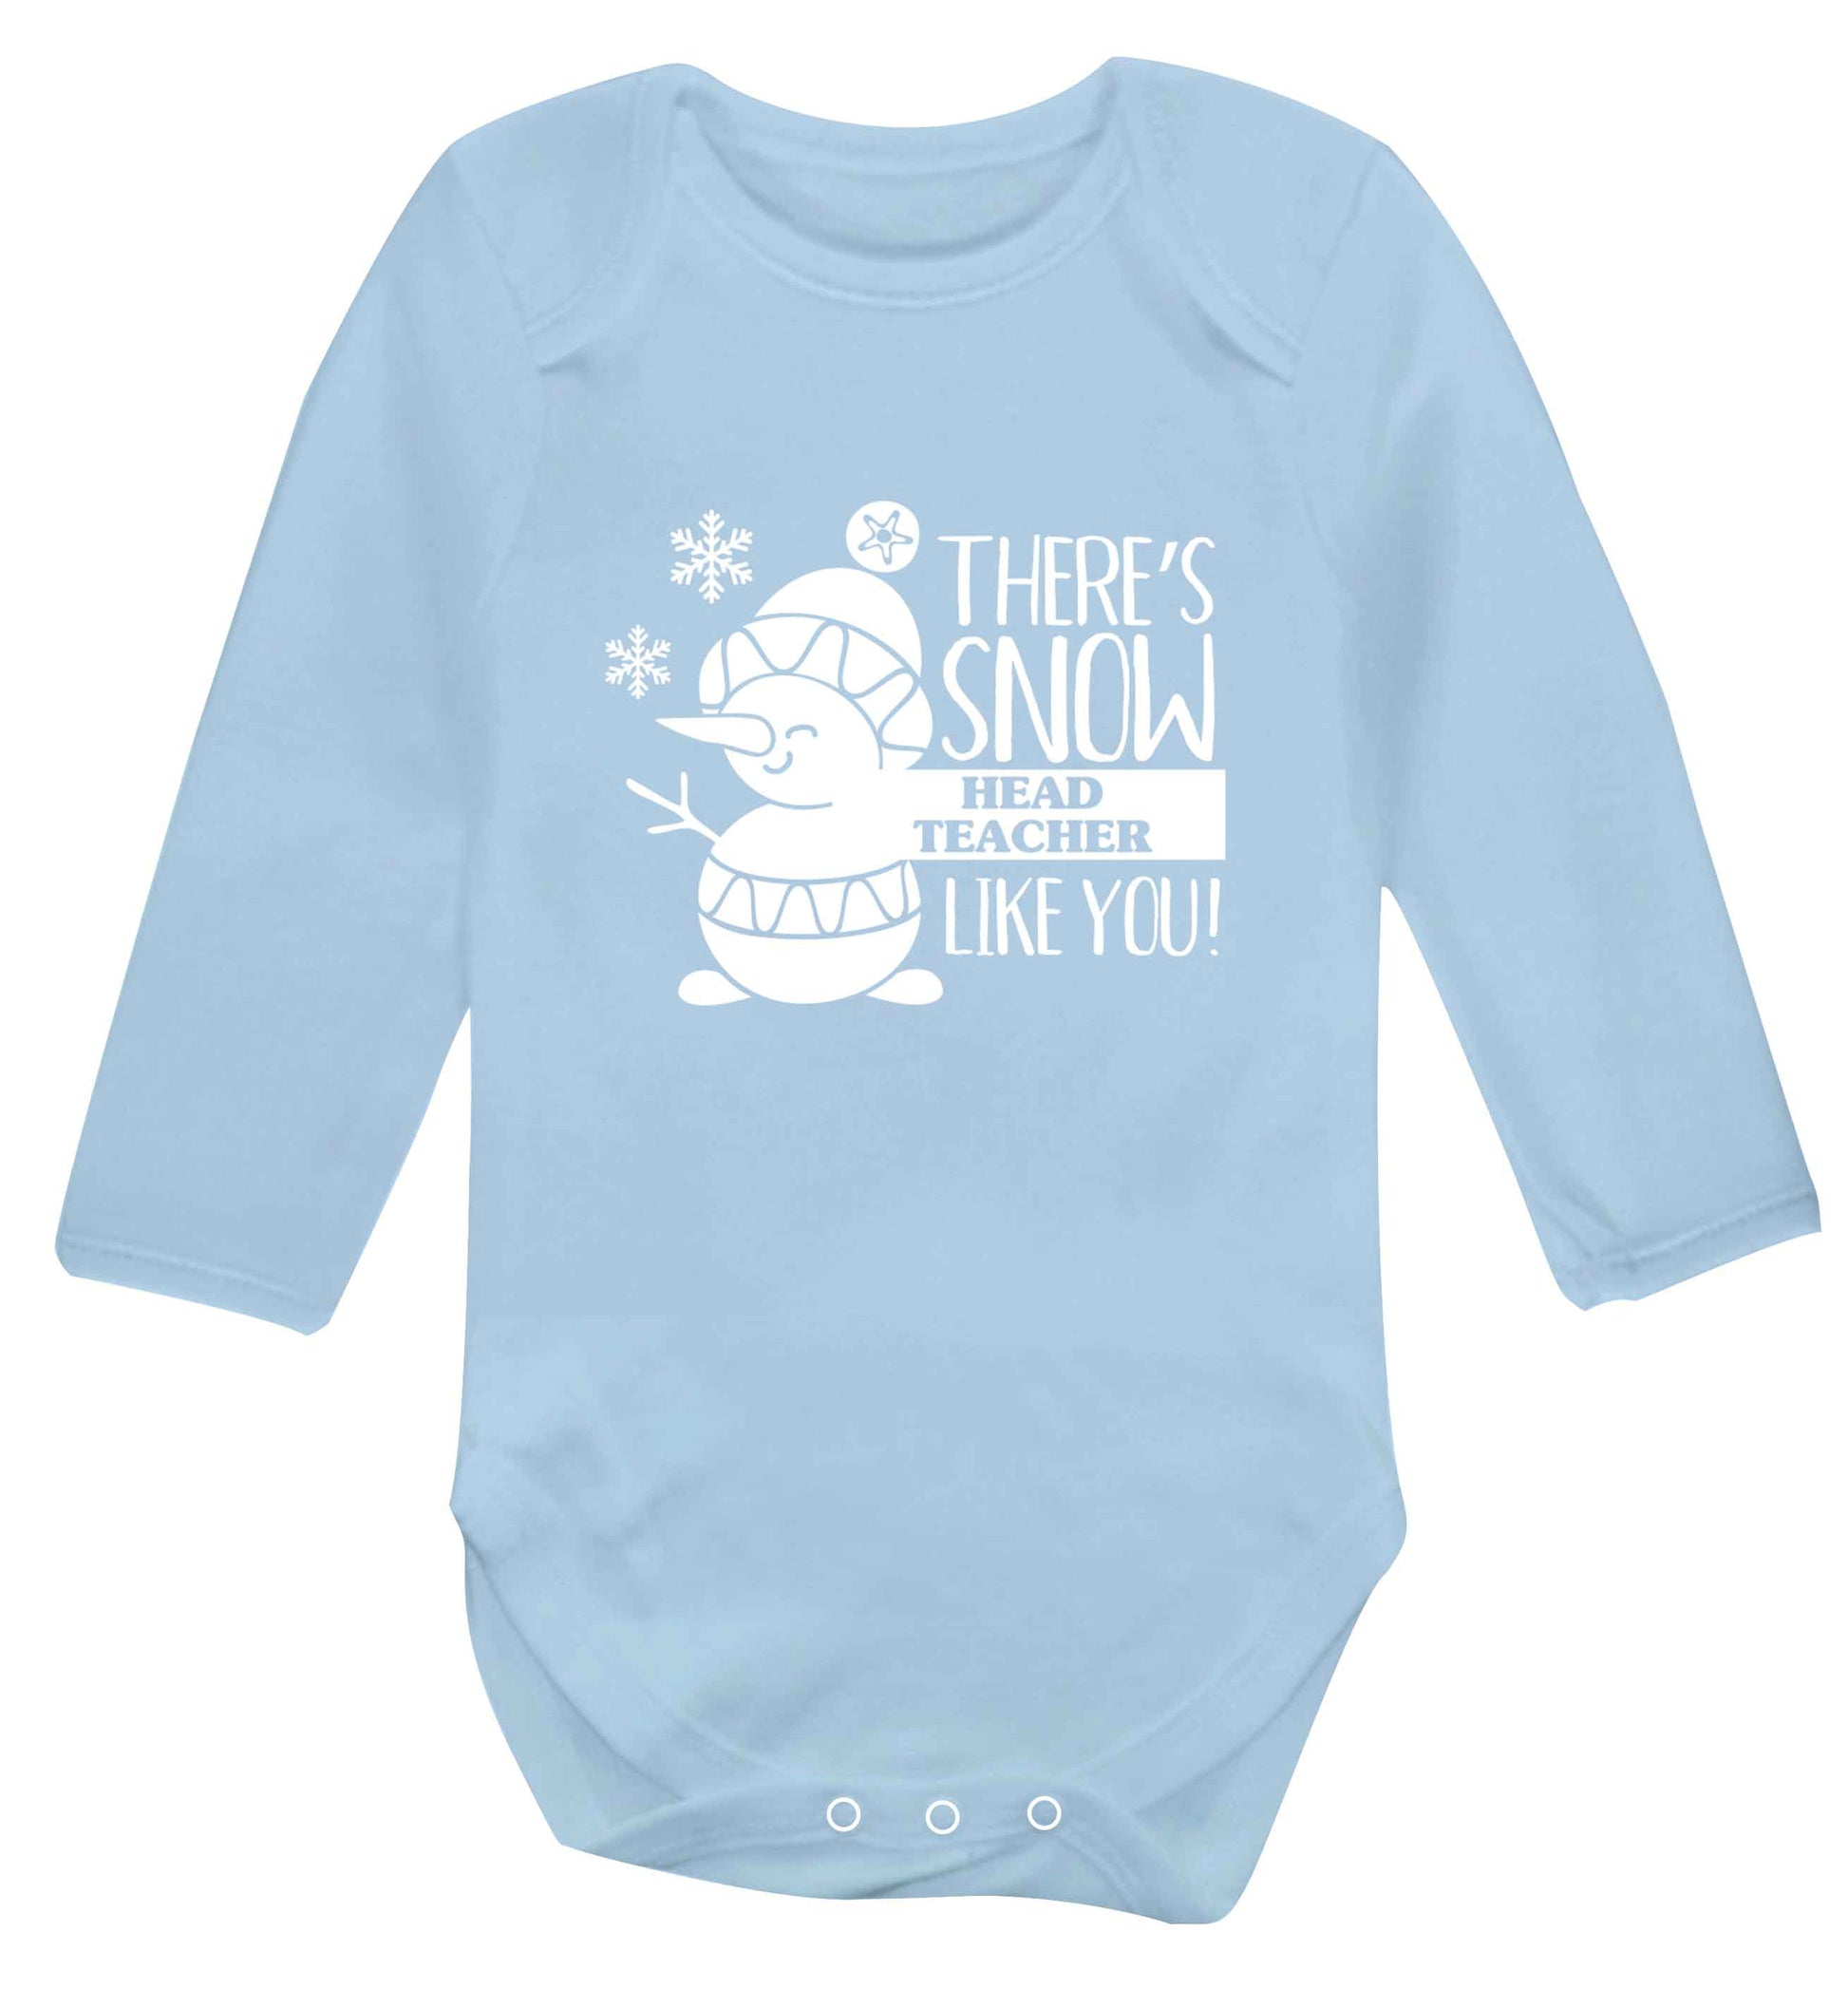 There's snow head teacher like you baby vest long sleeved pale blue 6-12 months